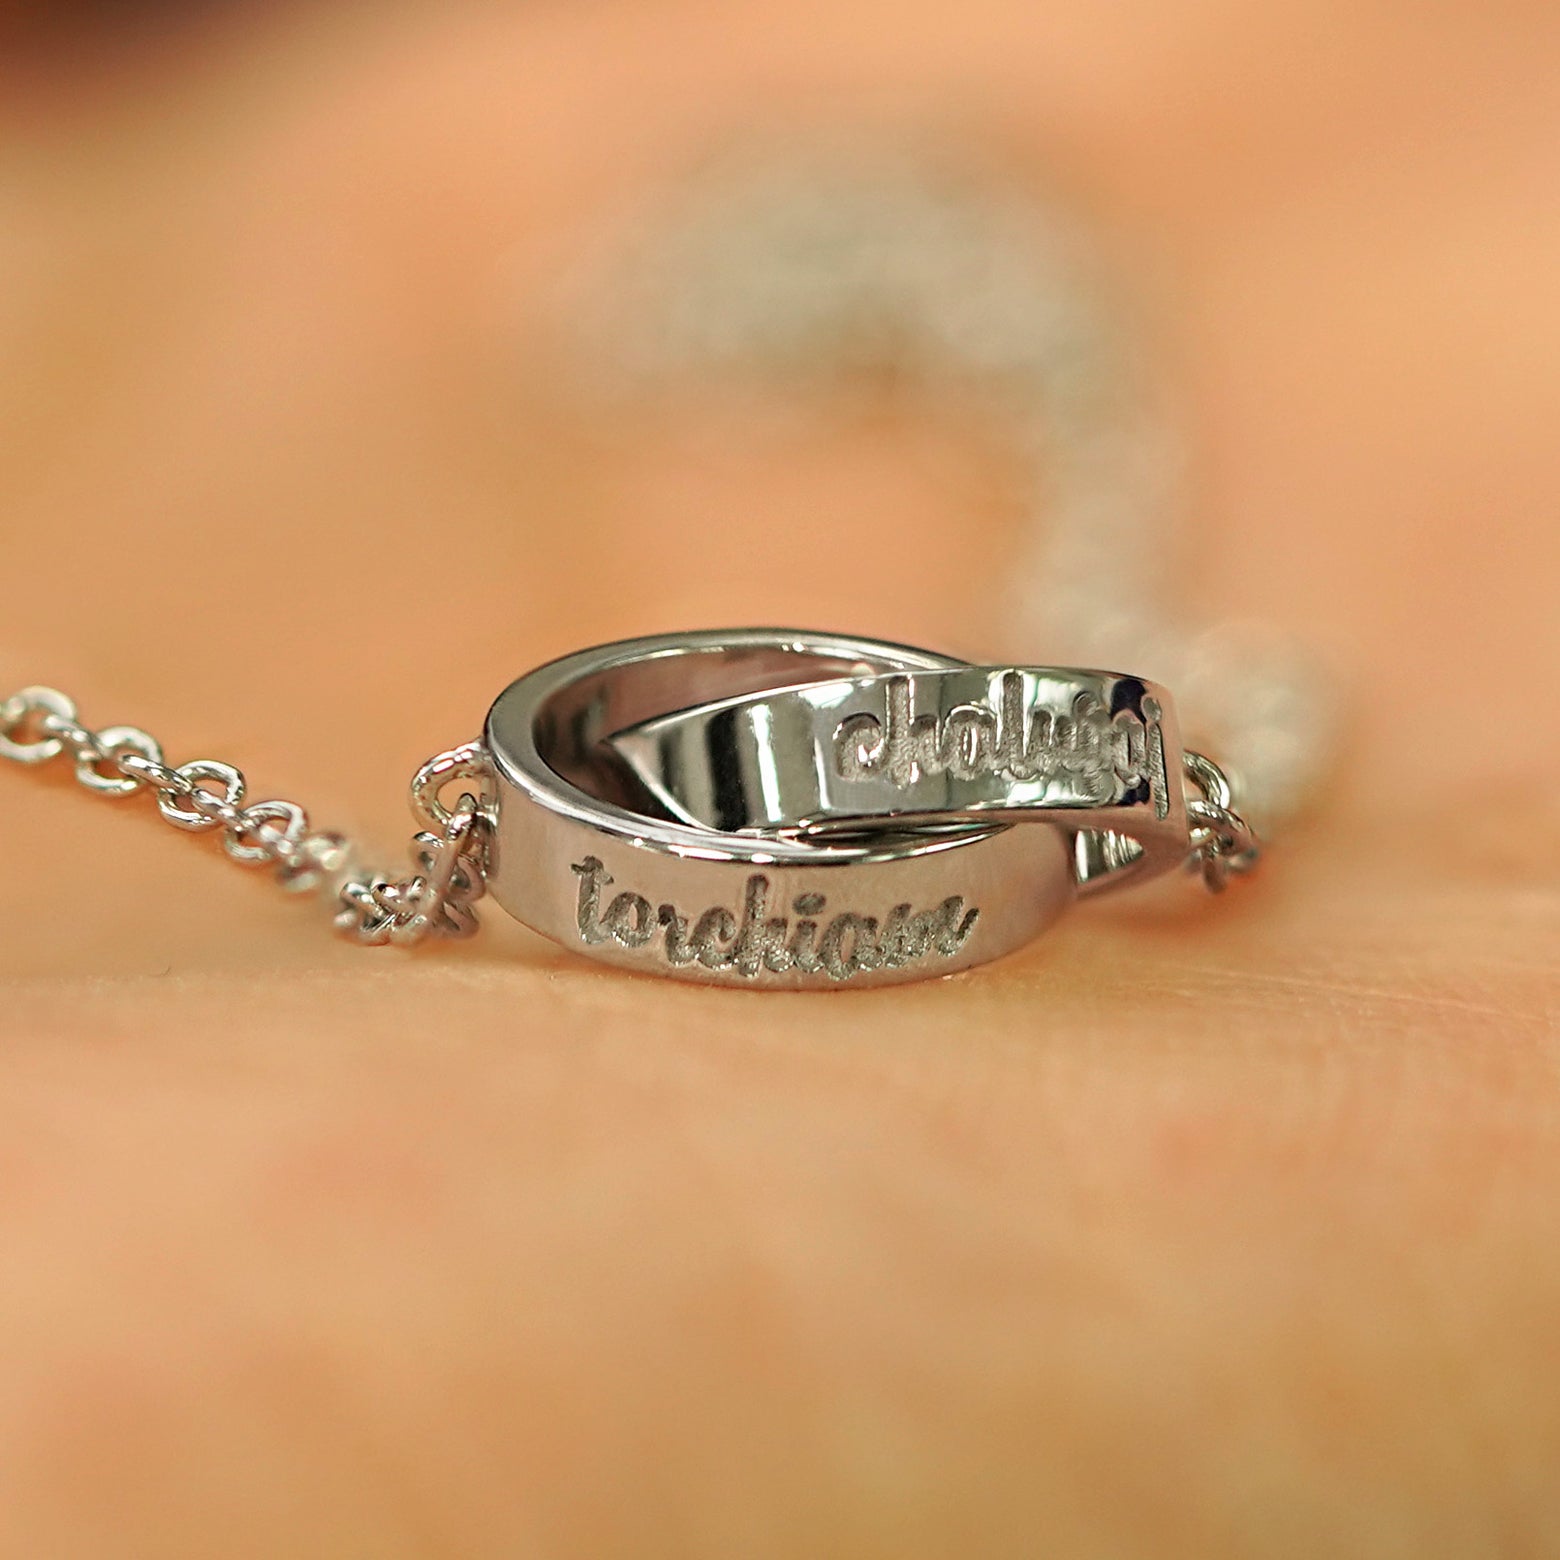 A solid white gold Bound Together Necklace showing engraved names on the outside of both rings